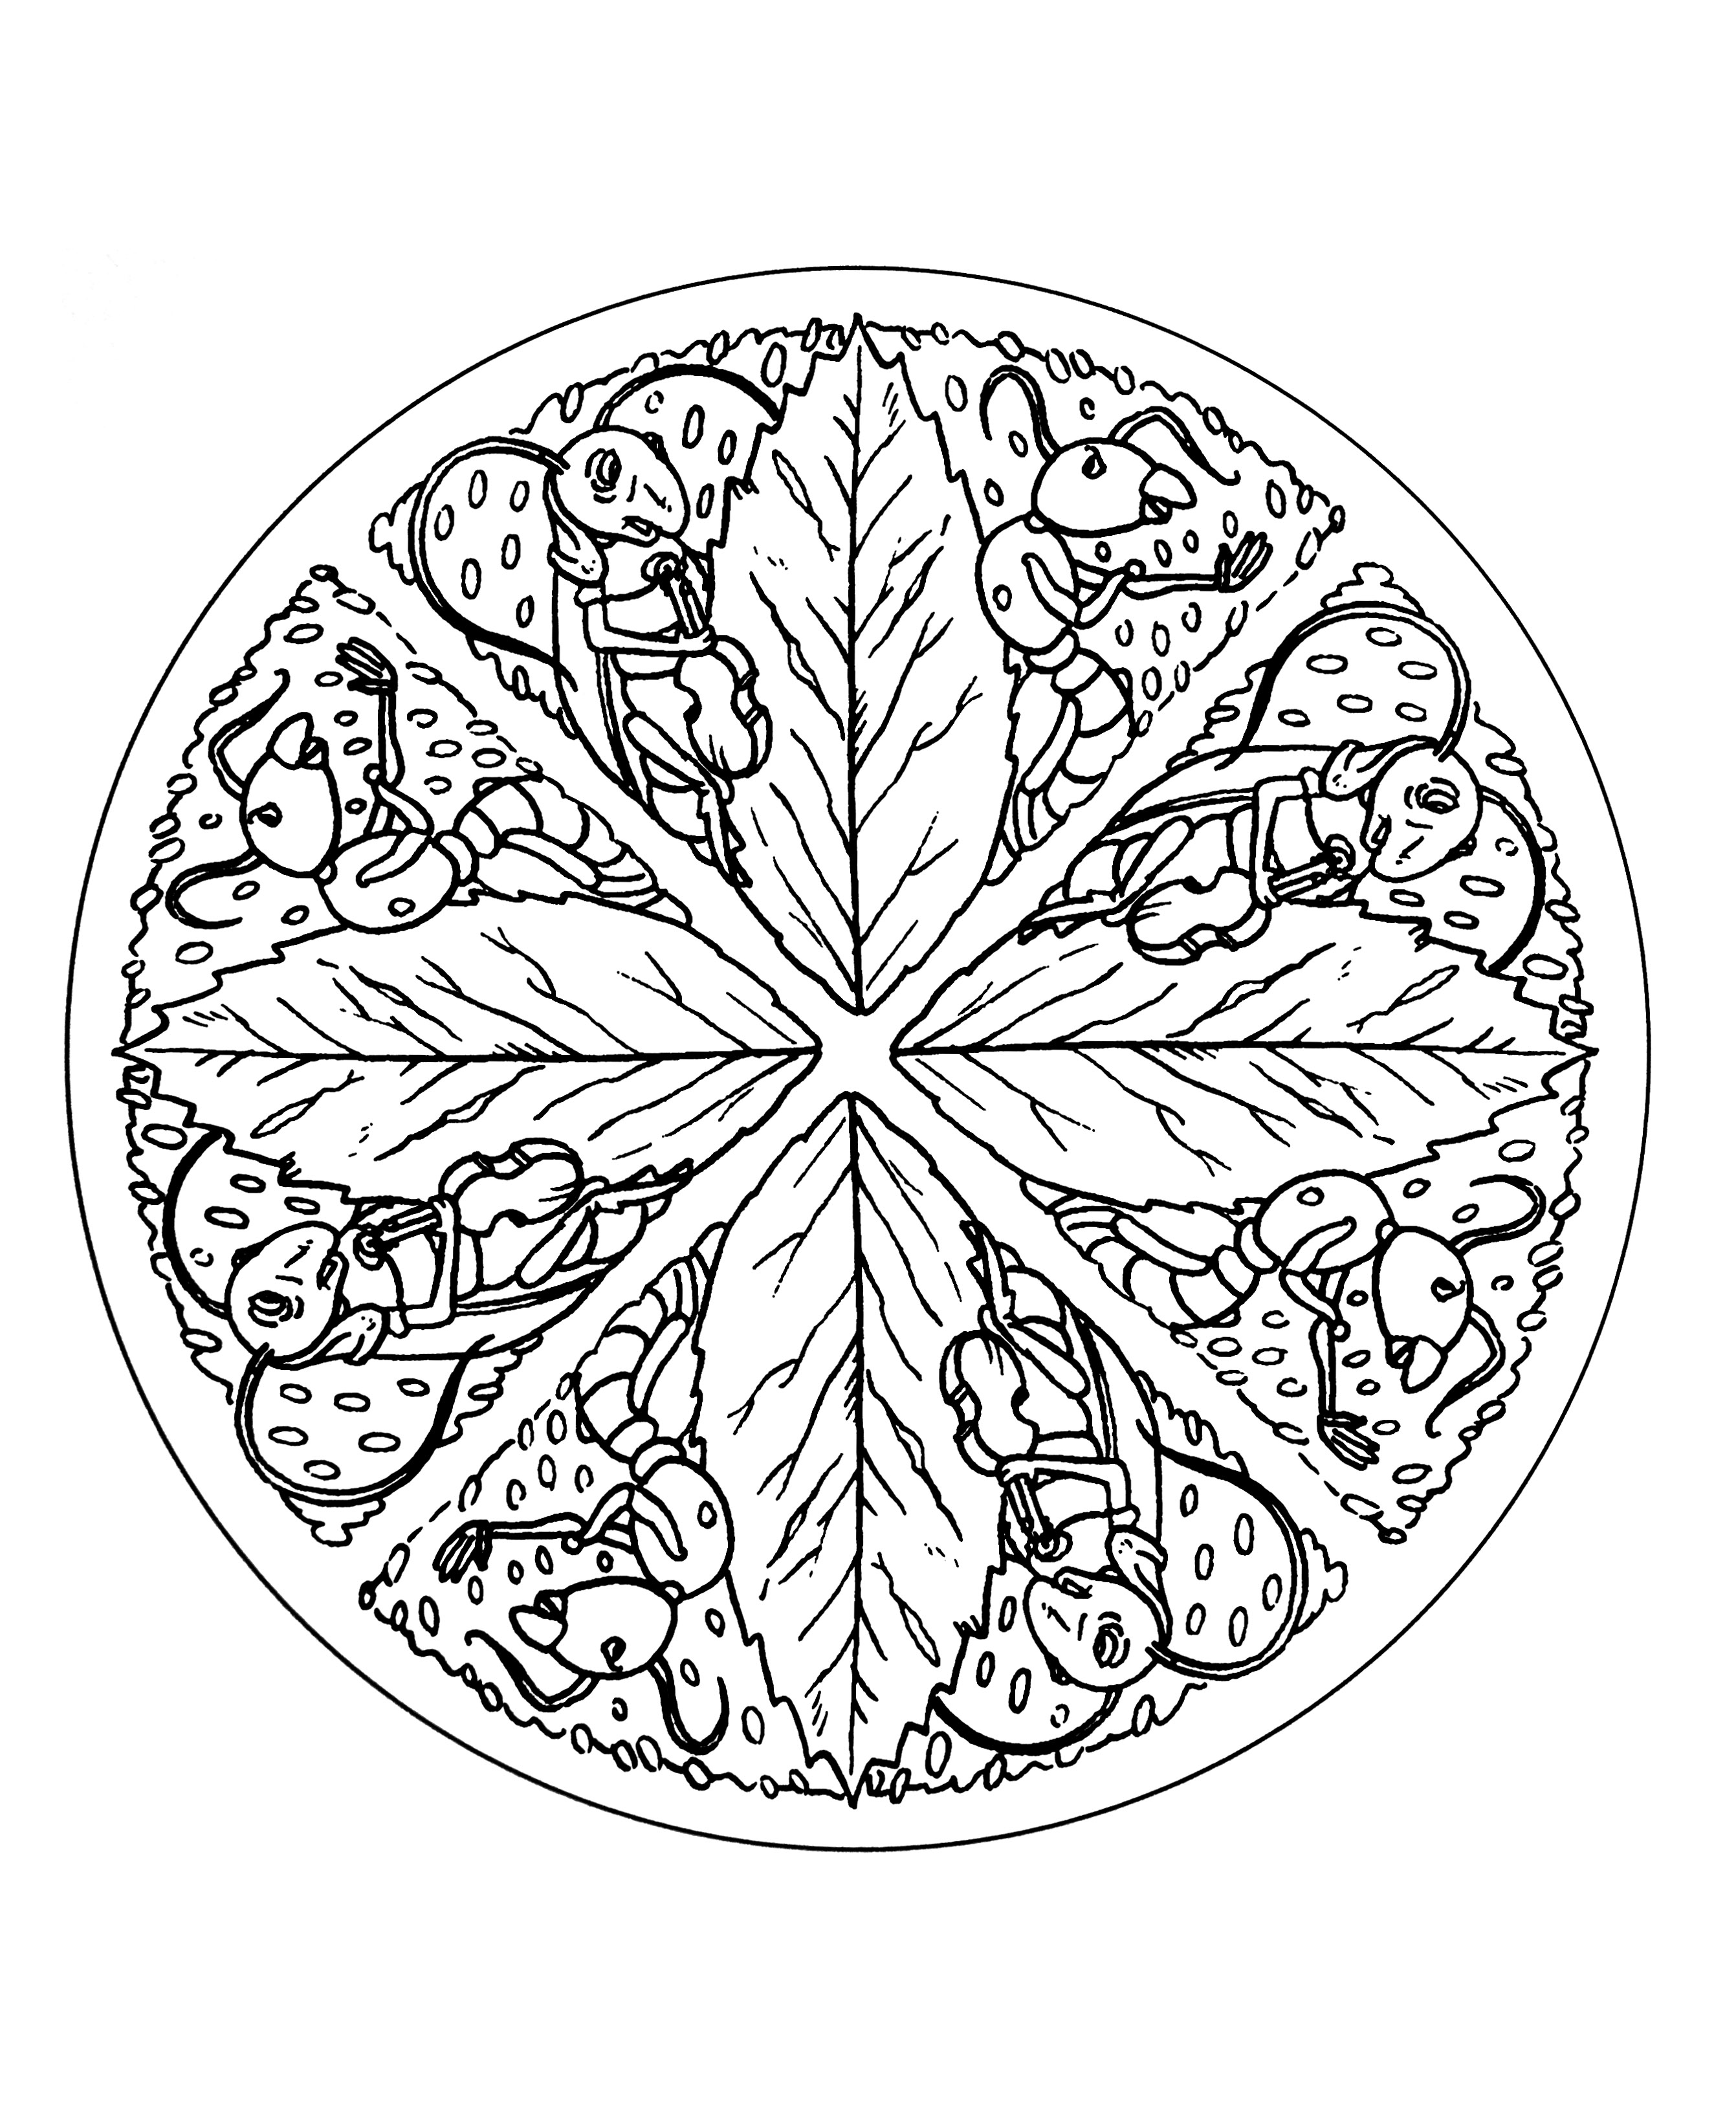 Mandala to color difficult - 31